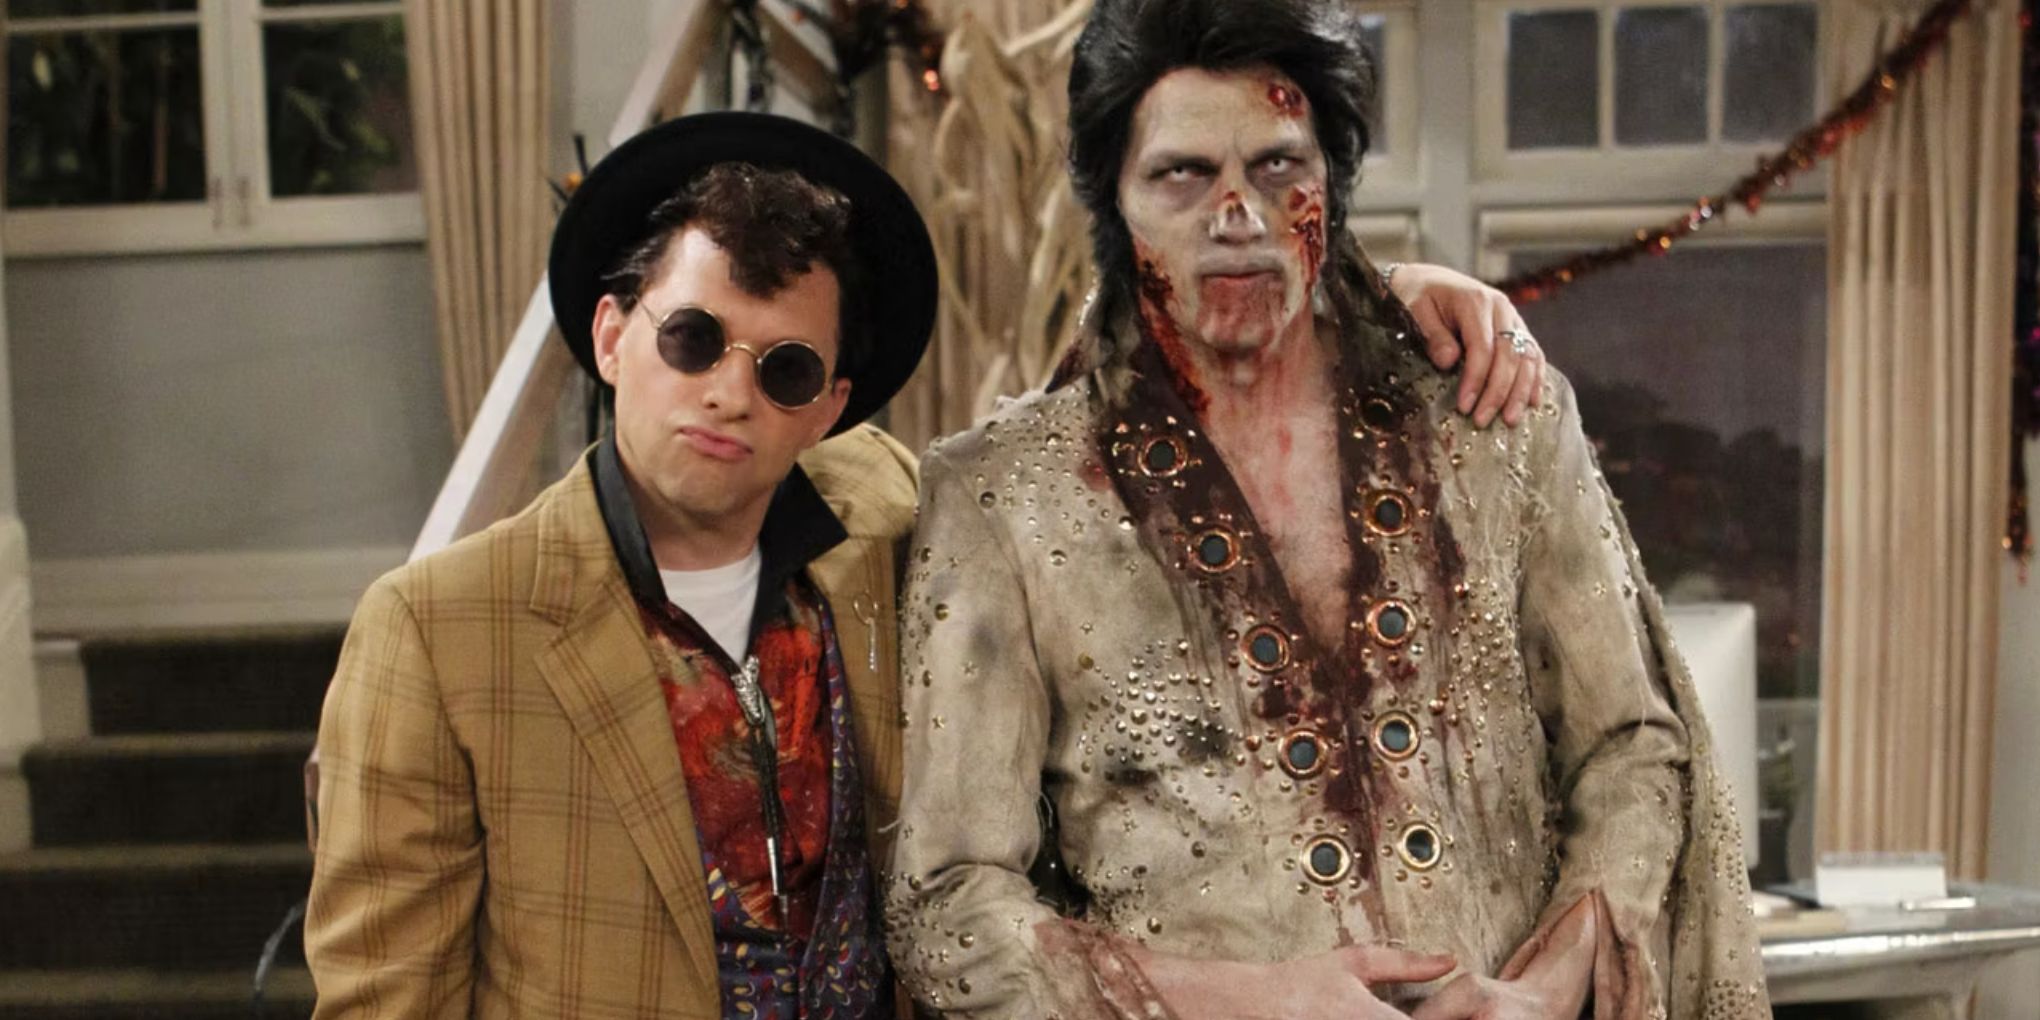 Jon Cryer as Ferris Bueller and Ashton Kutcher as a zombie Elvis in a Two and a Half Men Halloween episode